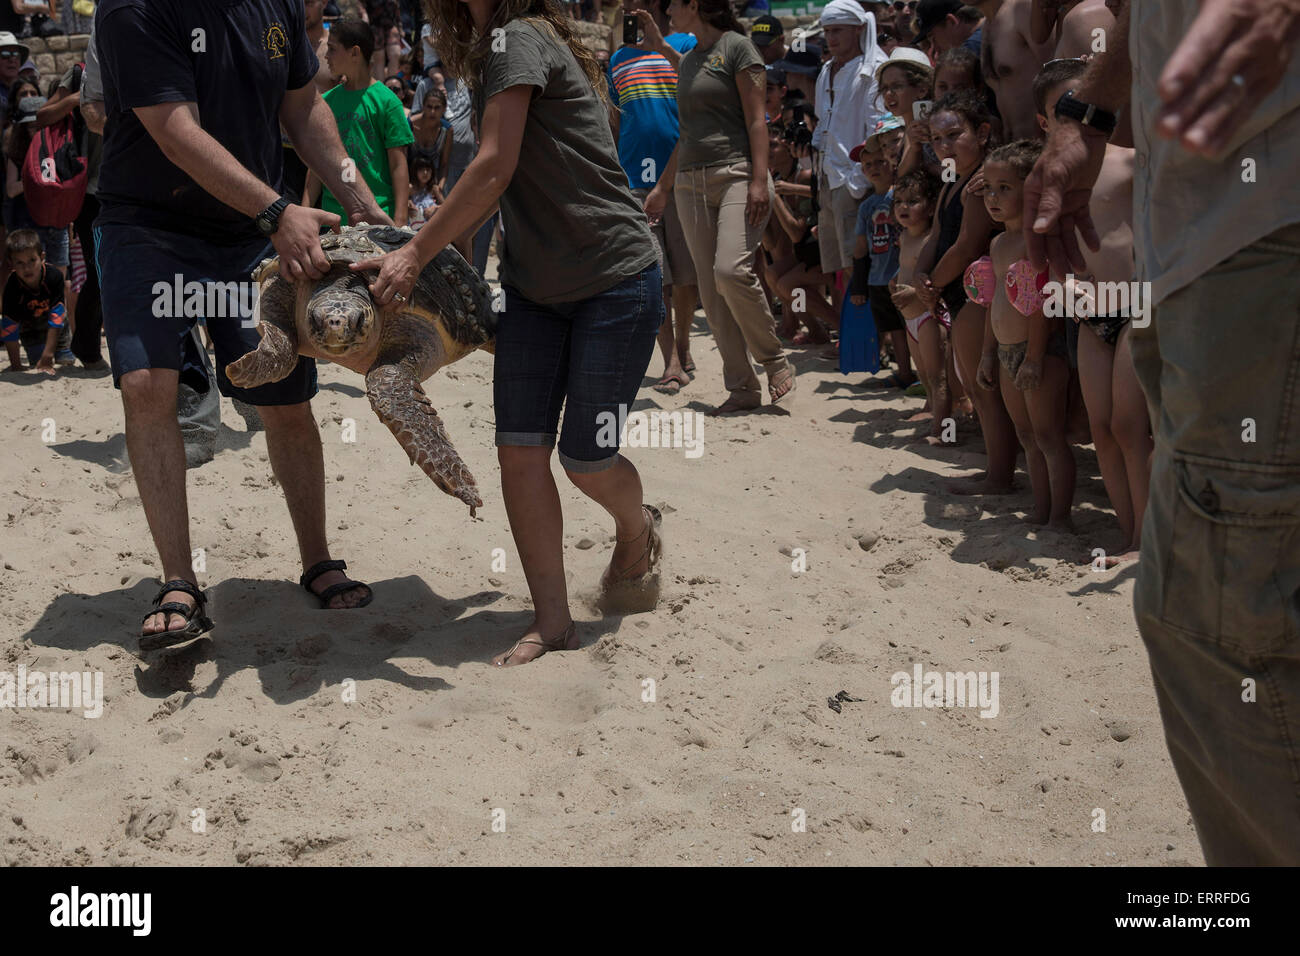 (150607) -- ASHKELON (ISRAEL), June 7, 2015 (Xinhua) -- Naima, thirty-year-old loggerhead sea turtle, is released back into the Mediterranean Sea at the Ashkelon beach, southern Israel, on June 6, 2015. The turtle was treated at the Sea Turtle Rescue Center, run by the Israel National Nature and Parks Authority, after it was found injured on the Michmoret beach. (Xinhua) Stock Photo